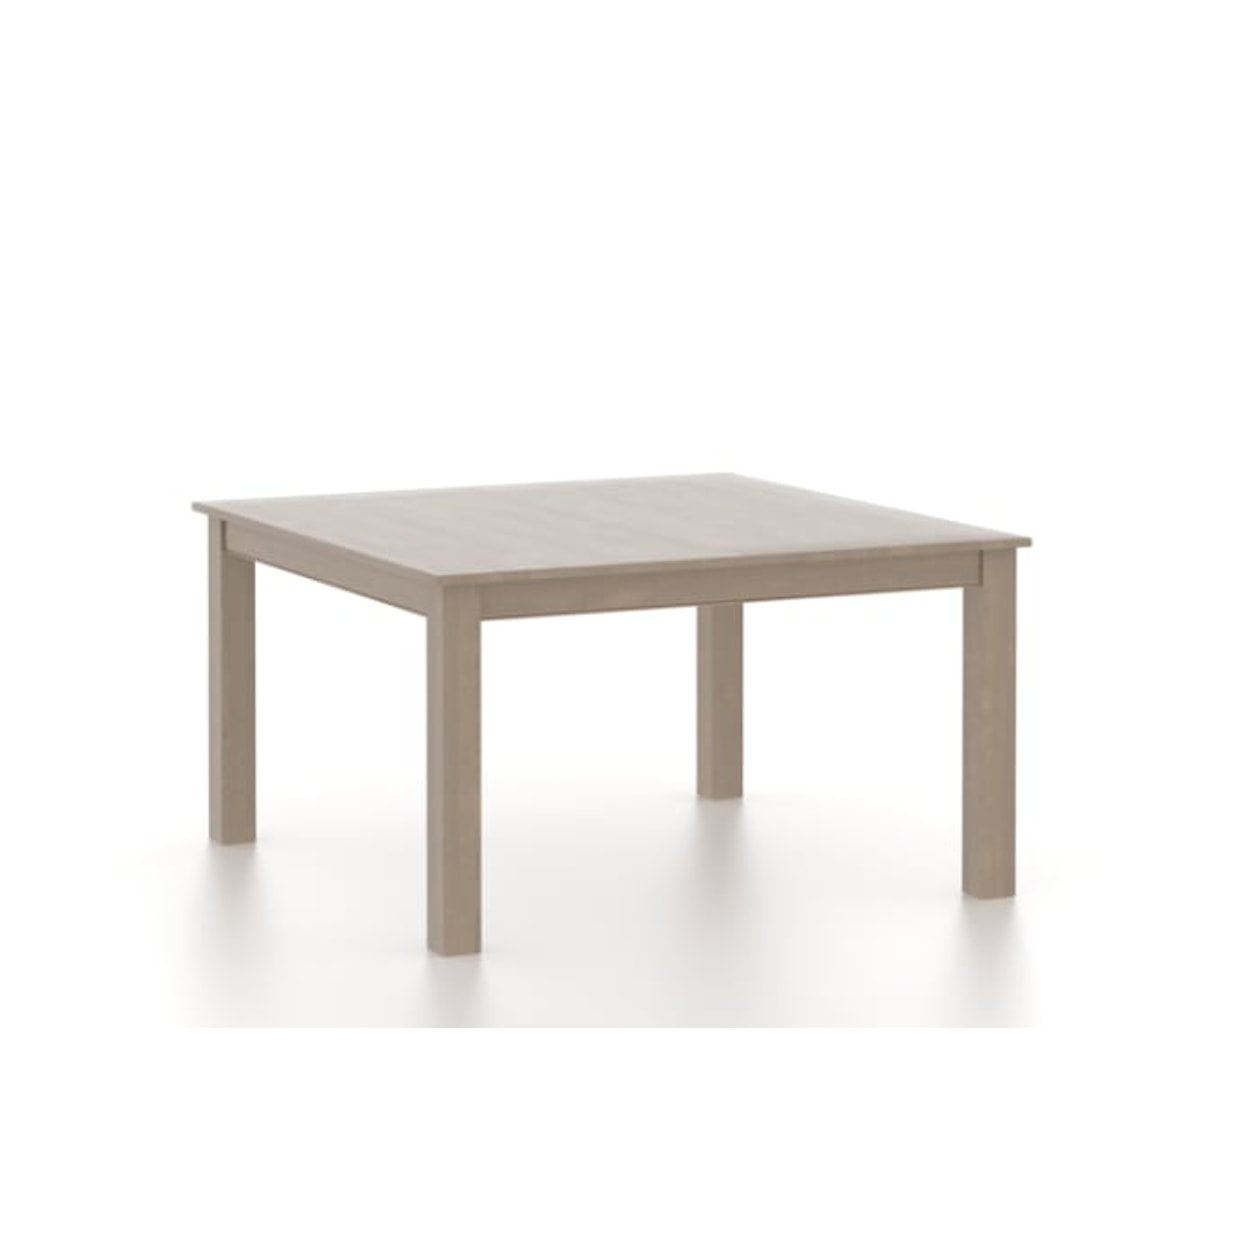 Canadel Gourmet Square wood table